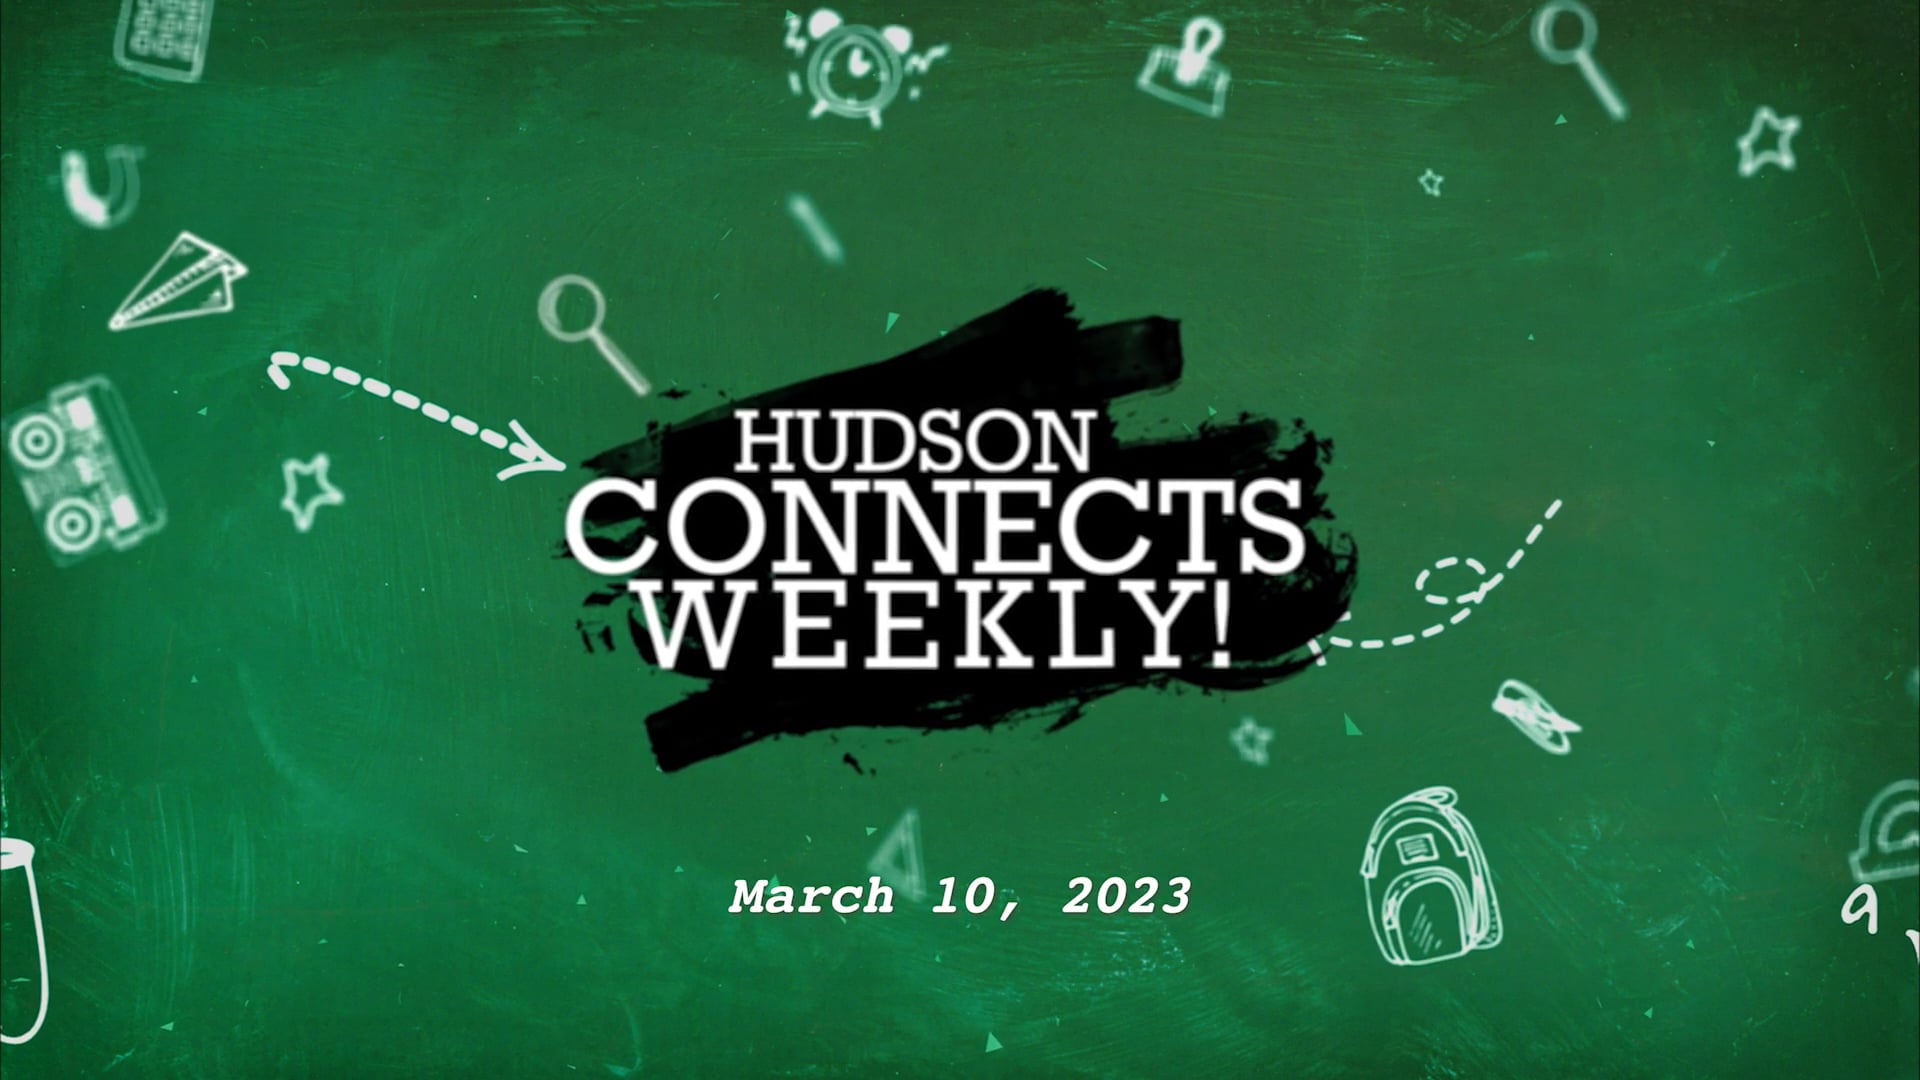 Hudosn Connects Weekly - March 10, 2023